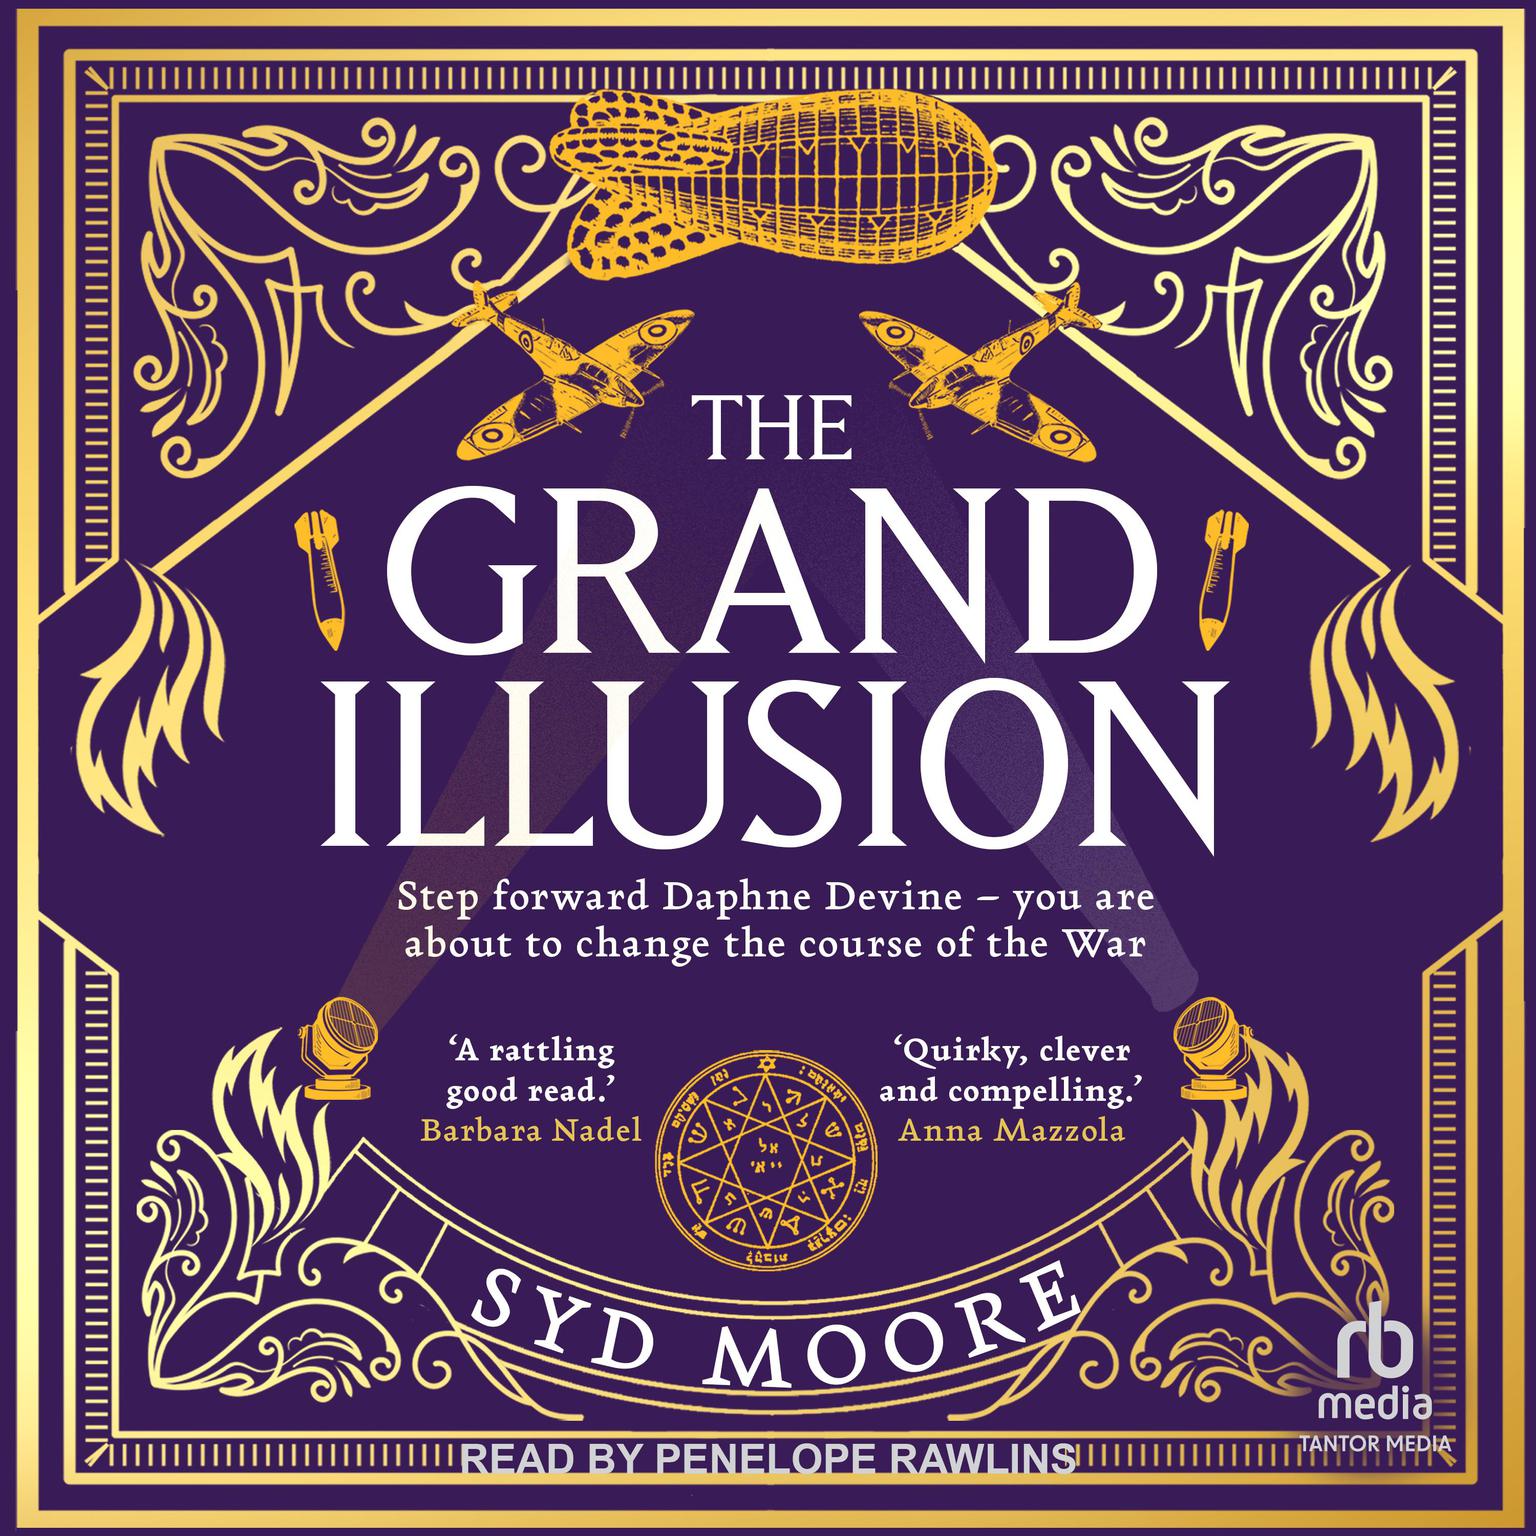 The Grand Illusion Audiobook, by Syd Moore